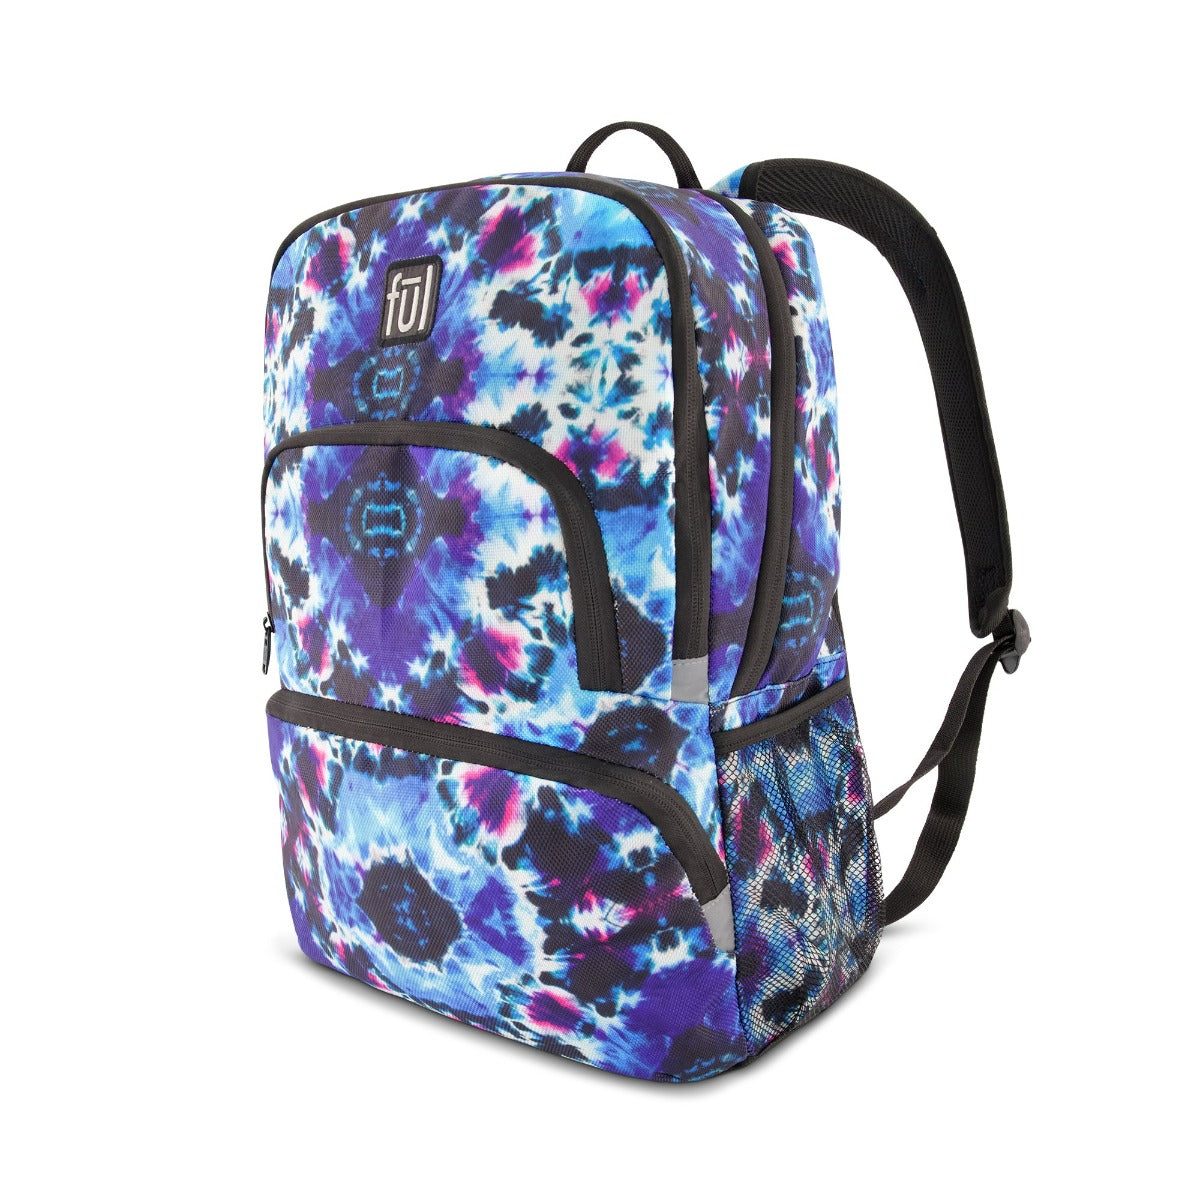 Terrace Laptop Backpack FUL Blue White Carry-On Backpack On Sale $29.99